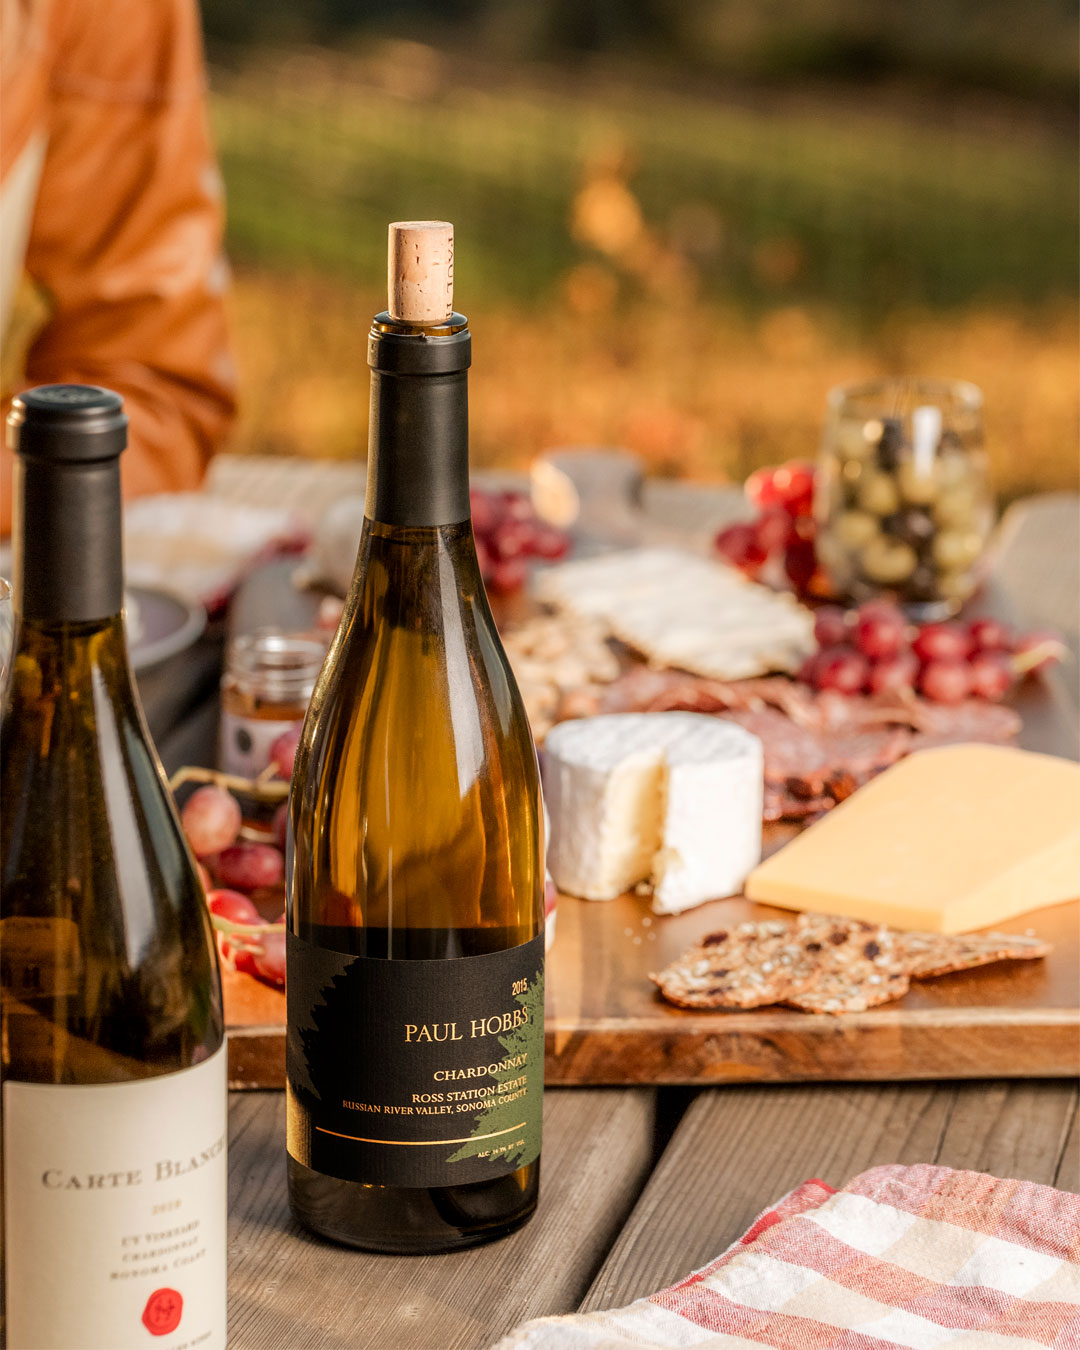 Paul Hobbs Chardonnay paired with cheese by Frank Gutierrez-